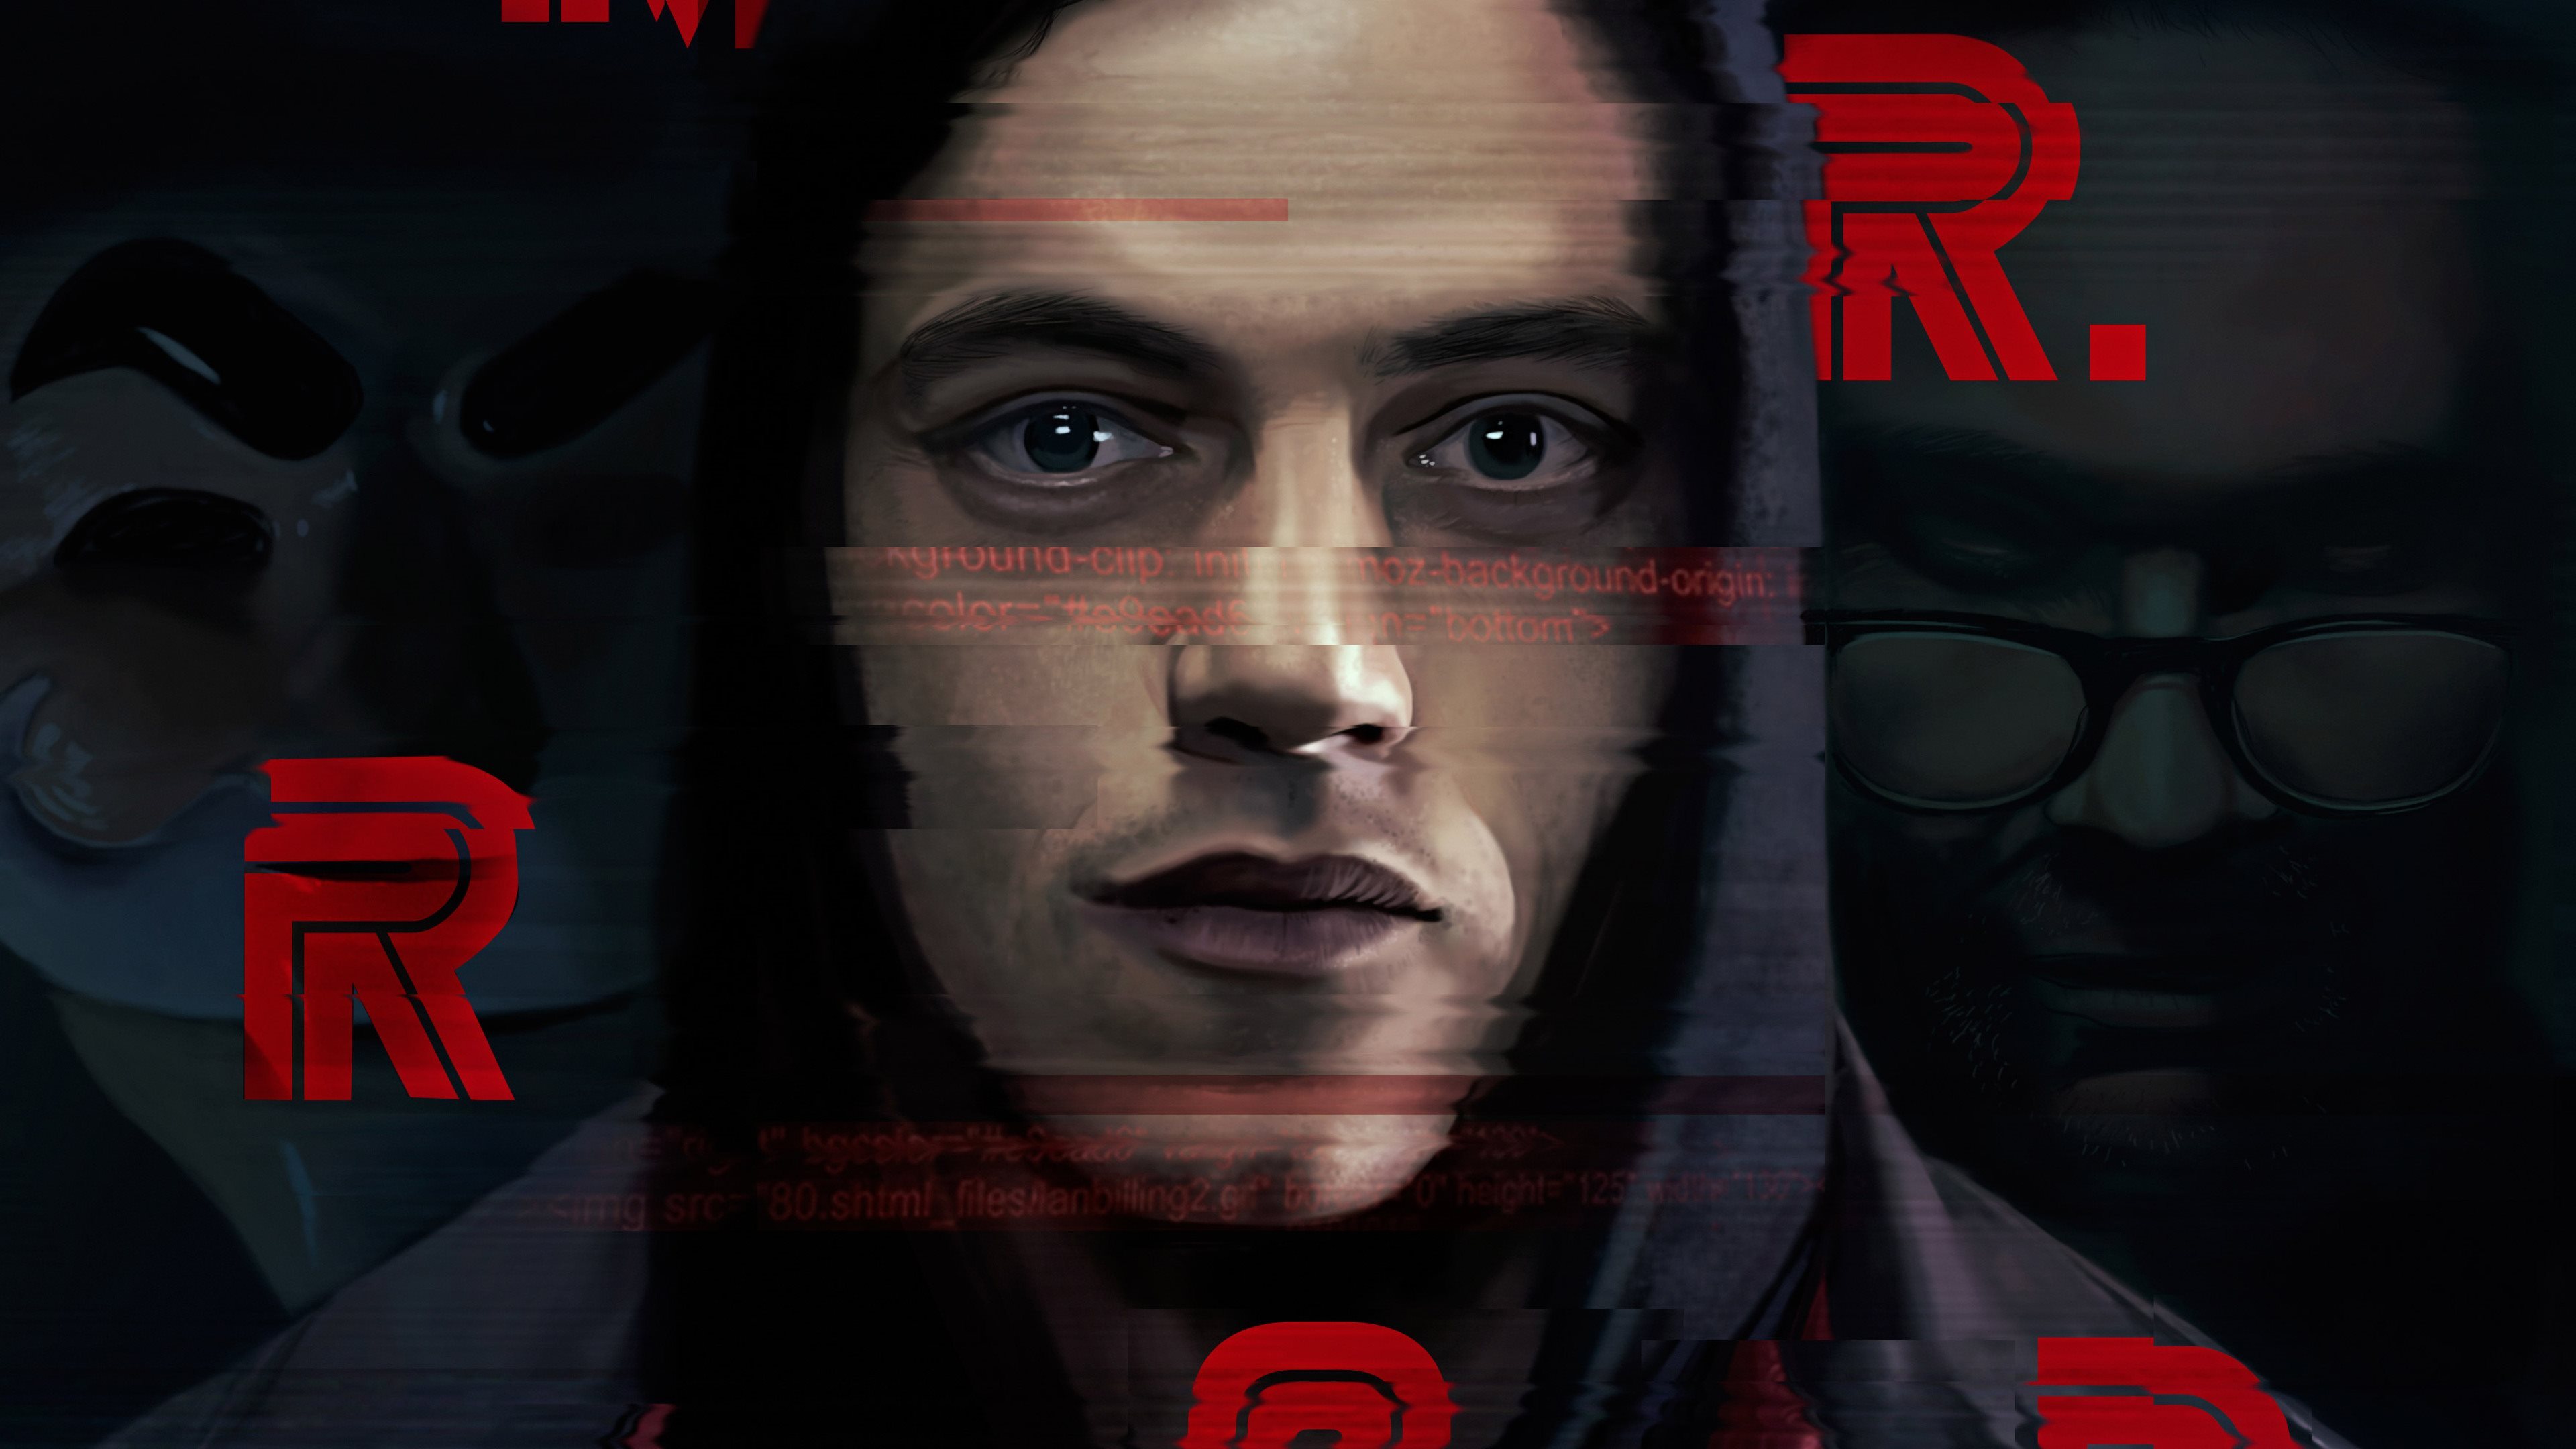 Download wallpaper Mr Robot, 4k, TV Series, fan art for desktop with resolution 3840x2160. High Quality HD picture wallpaper